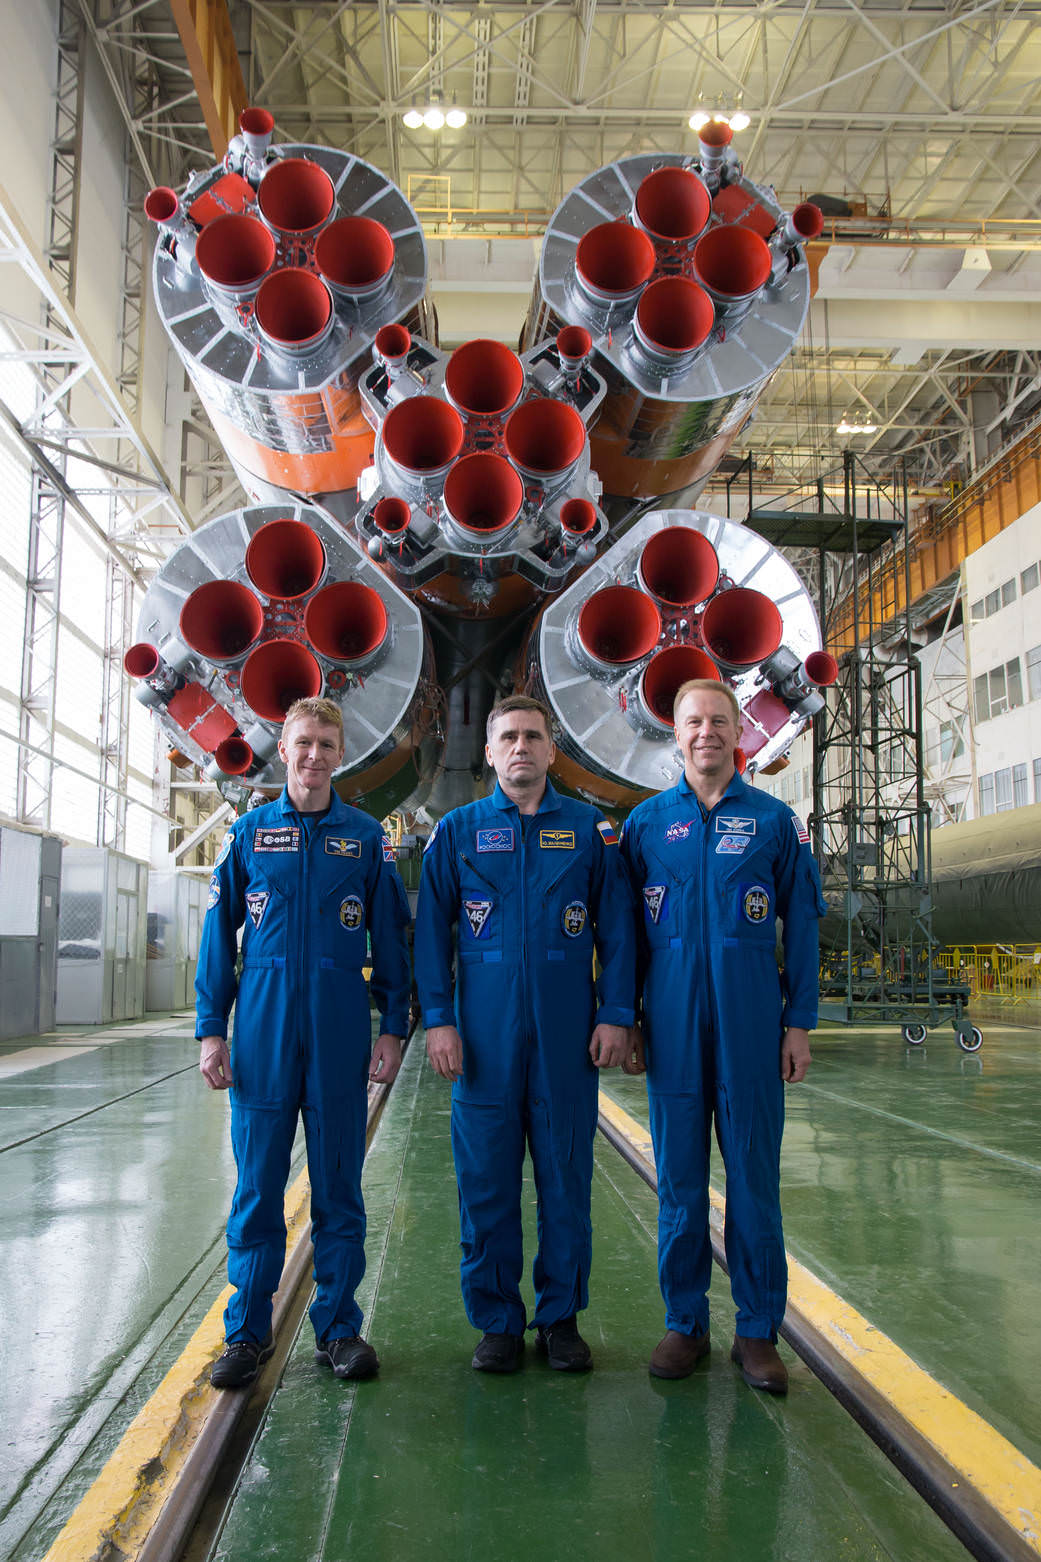 In the Integration Facility at the Baikonur Cosmodrome in Kazakhstan, Expedition 46-47 crew members Tim Peake of the European Space Agency (left), Yuri Malenchenko of the Russian Federal Space Agency (Roscosmos, center) and Tim Kopra of NASA (right) posed for pictures Dec. 10 in front of the first stage of the Soyuz booster rocket during final pre-launch training. Kopra, Peake and Malenchenko launched on  Dec. 15 on the Soyuz TMA-19M spacecraft for a six-month mission on the International Space Station. NASA/Victor Zelentsov